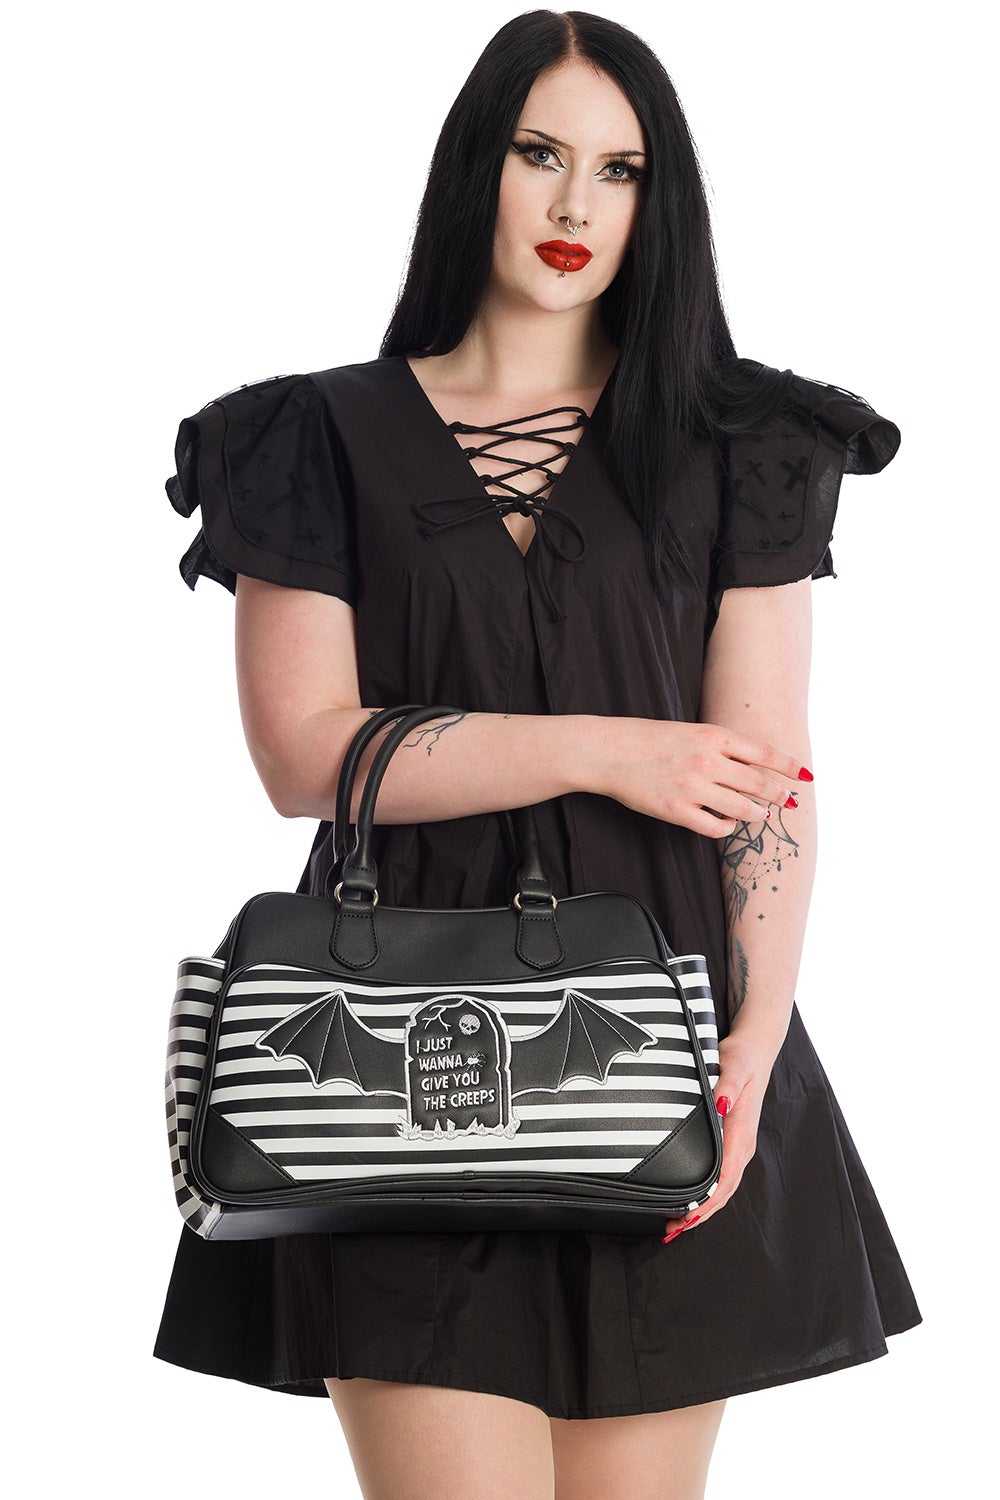 Model holding large black handbag in black and white stripe with gravestone and batwing print with the phrase 'I just wanna give you the creeps' 